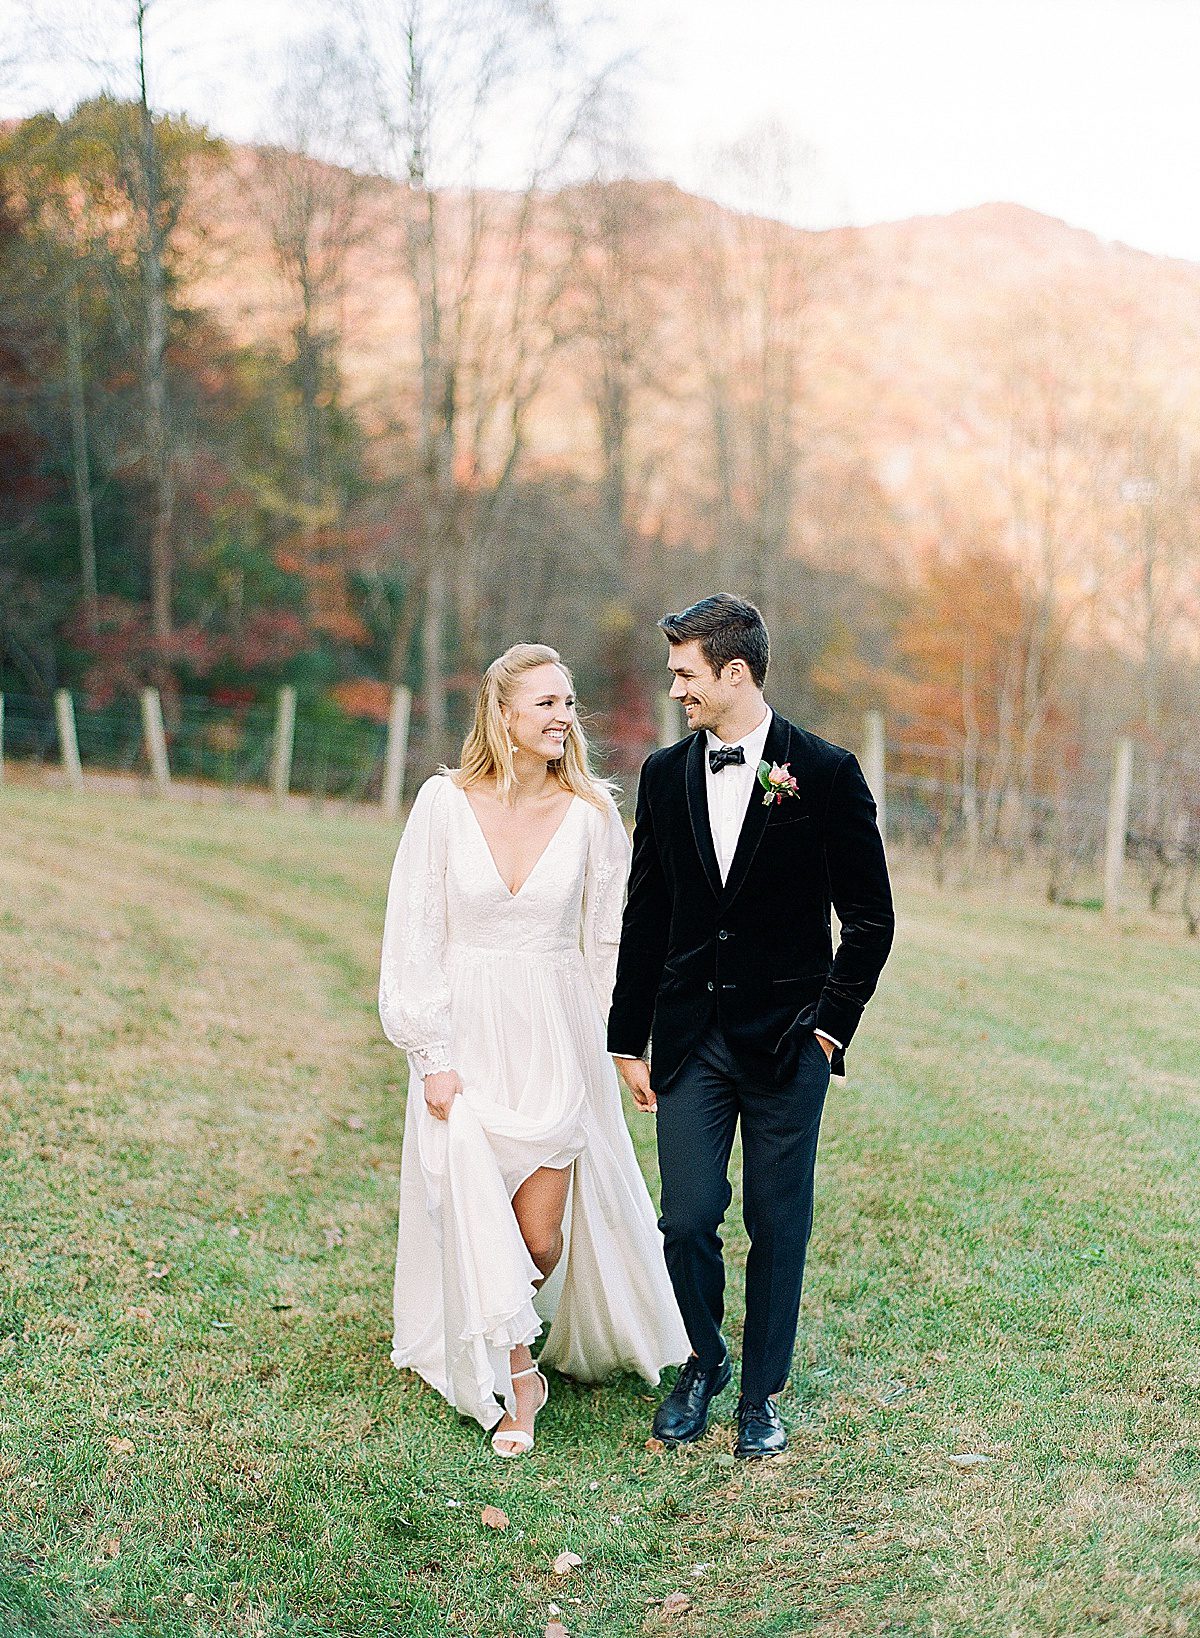 Bride Walking with her groom in Long Sleeve Leanne Marshall Gown Photo